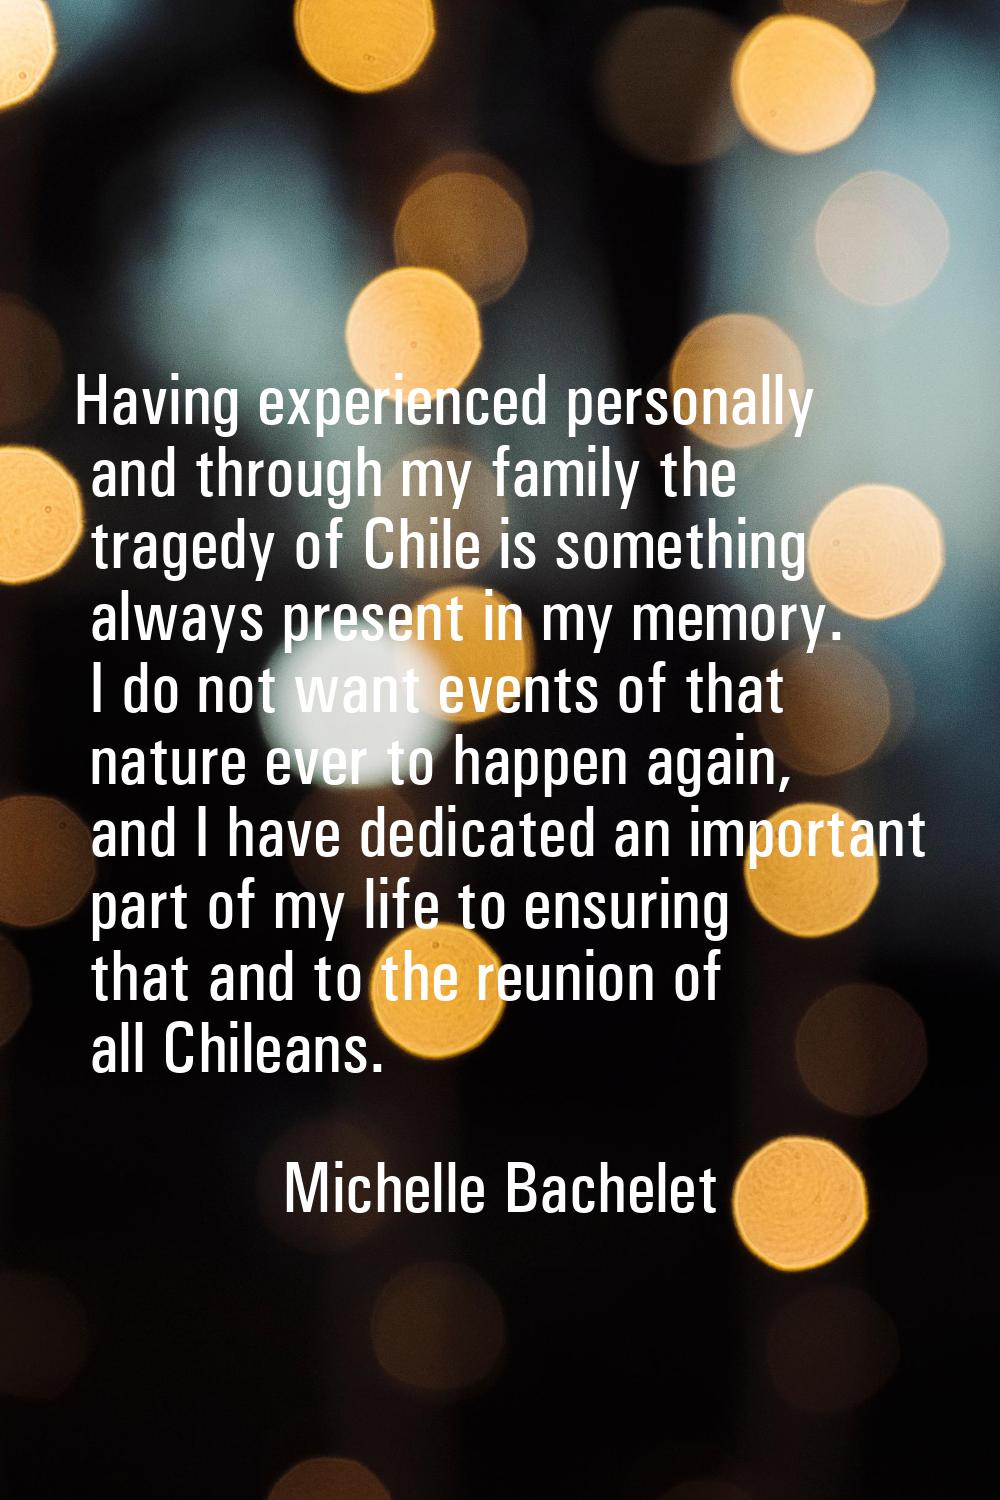 Having experienced personally and through my family the tragedy of Chile is something always presen